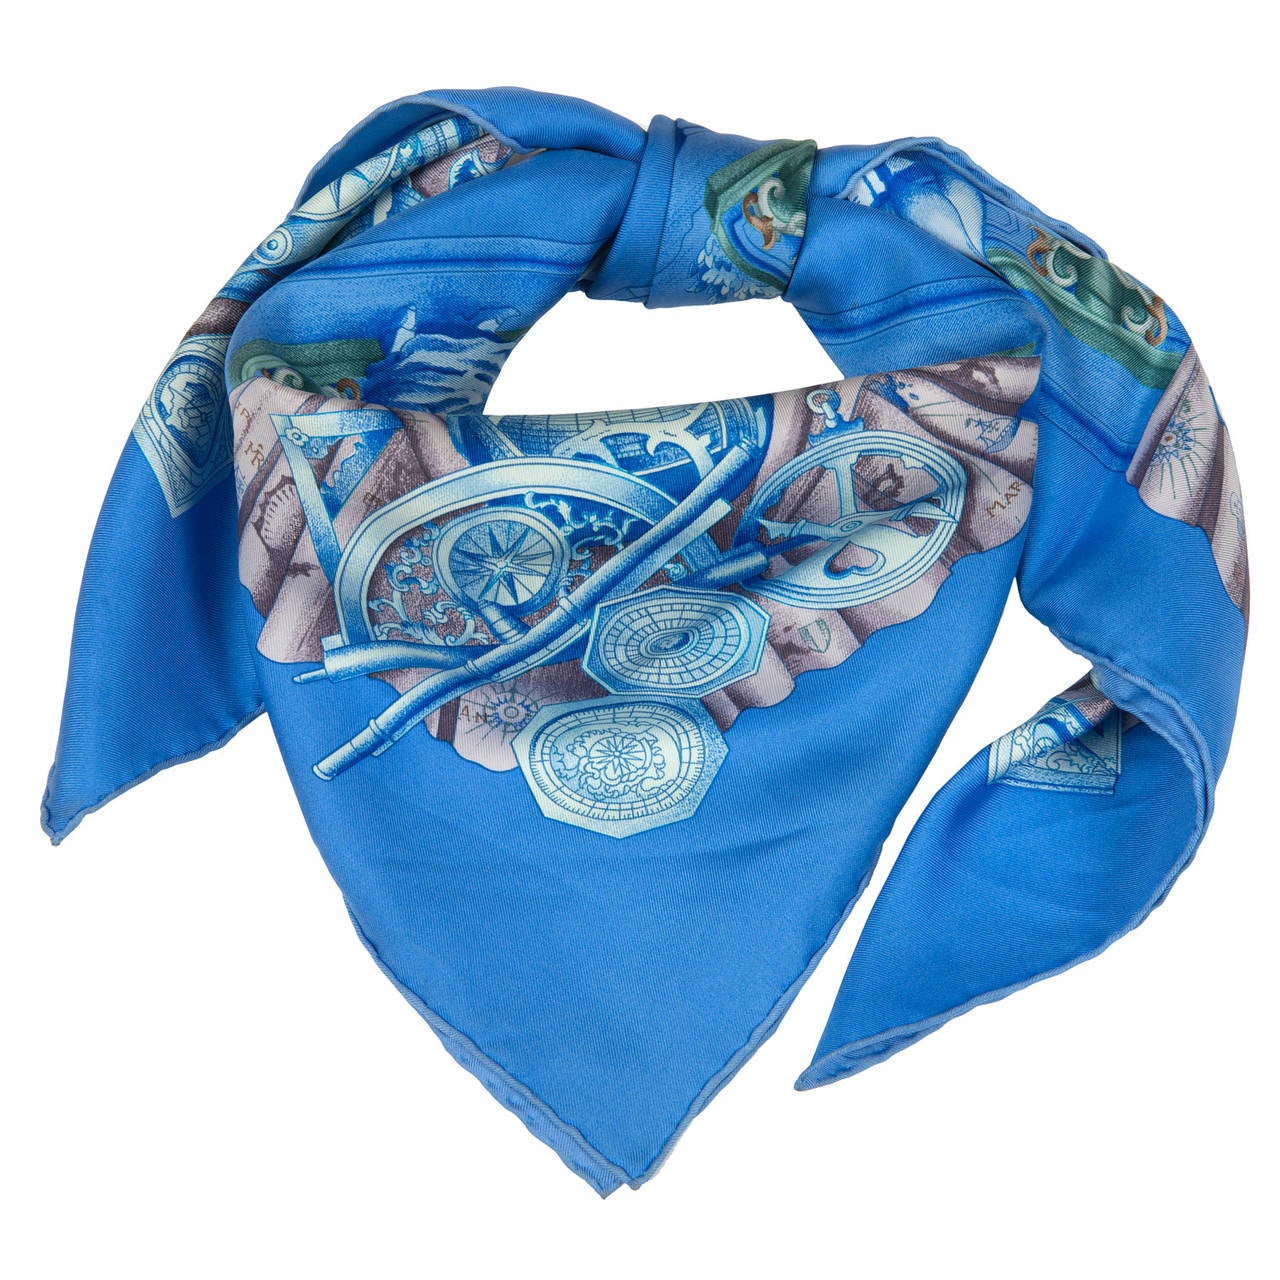 This fabulous Hermes, printed Silk Scarf, 'Azulejos' is in great condition, and comes with it's original box. The rich colours will enhance lots of different outfits.